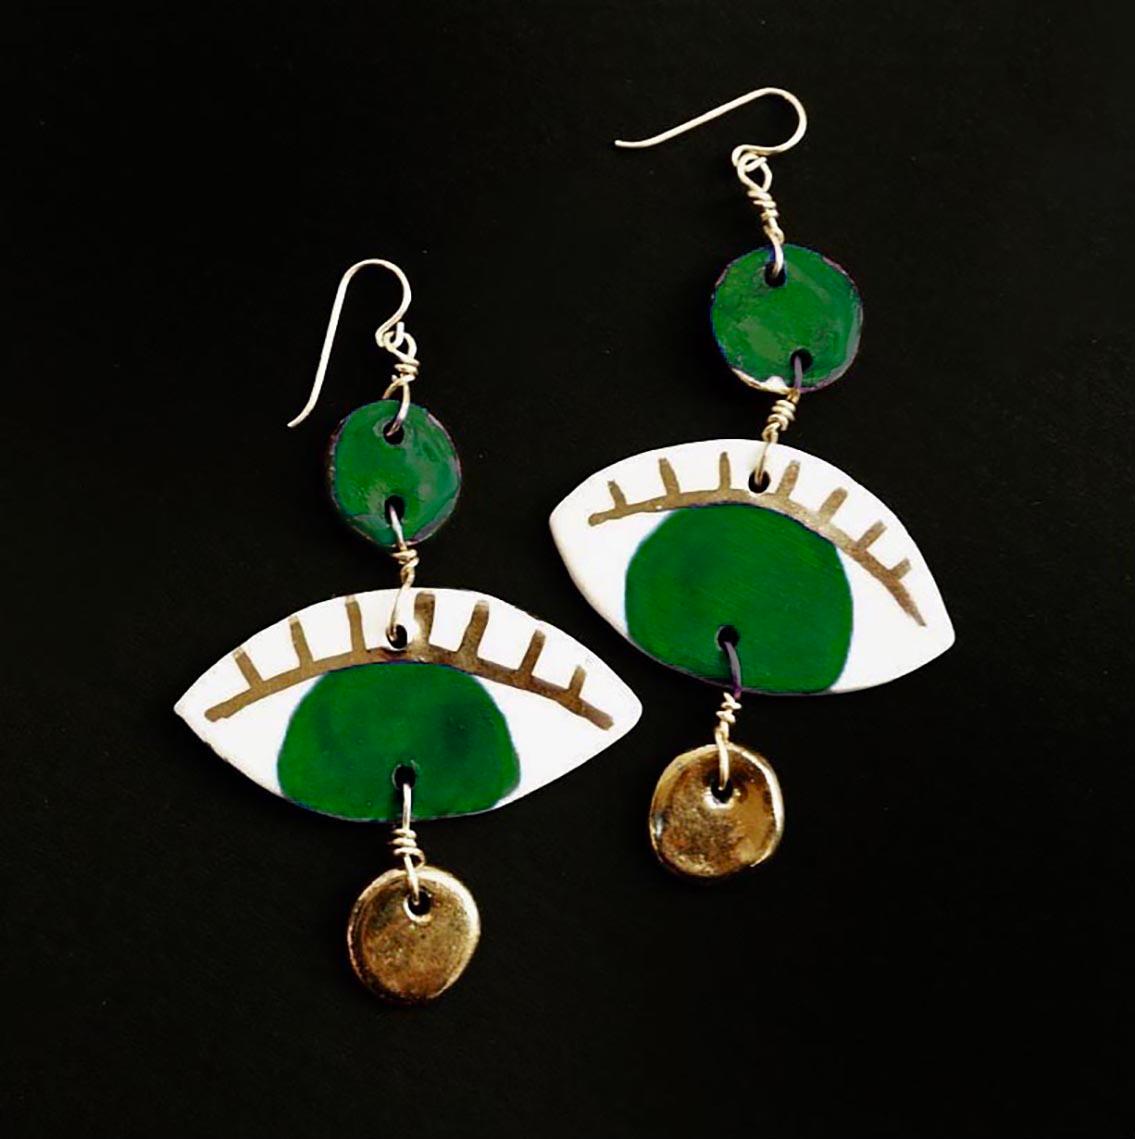 Handcrafted earrings in porcelain, painted in our deep and custom made forest green glaze and with 14k gold leaf. Hypoallergenic gold-filled ear wire.  Each piece is hand made so slightly different from each other which gives our jewelry its unique